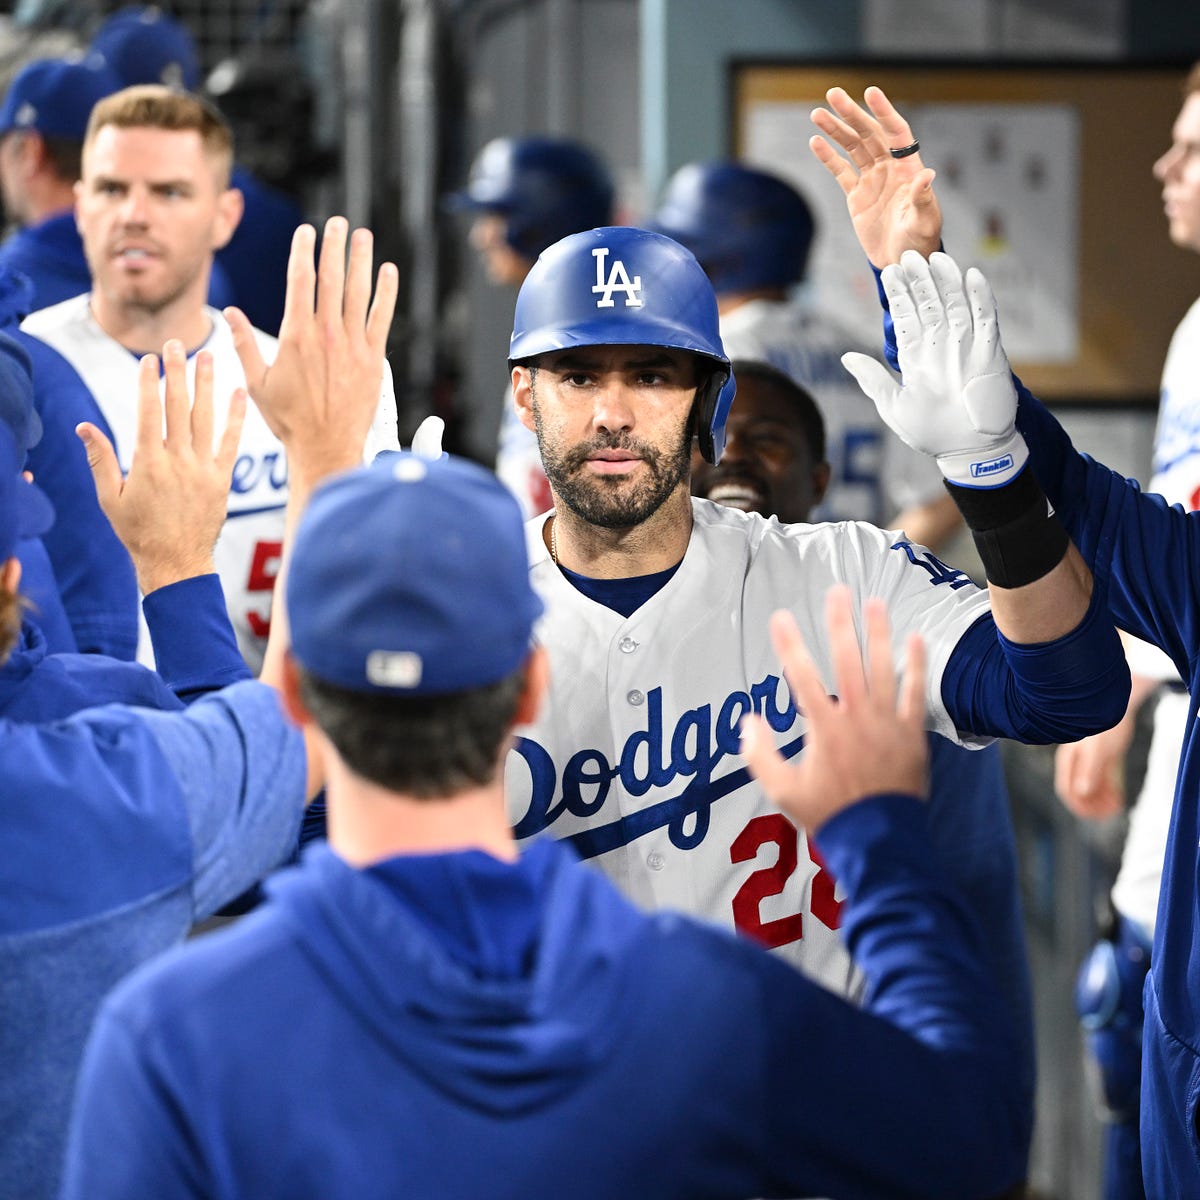 Dodgers aim for 'giant' comeback. It's a rarity, but teams have